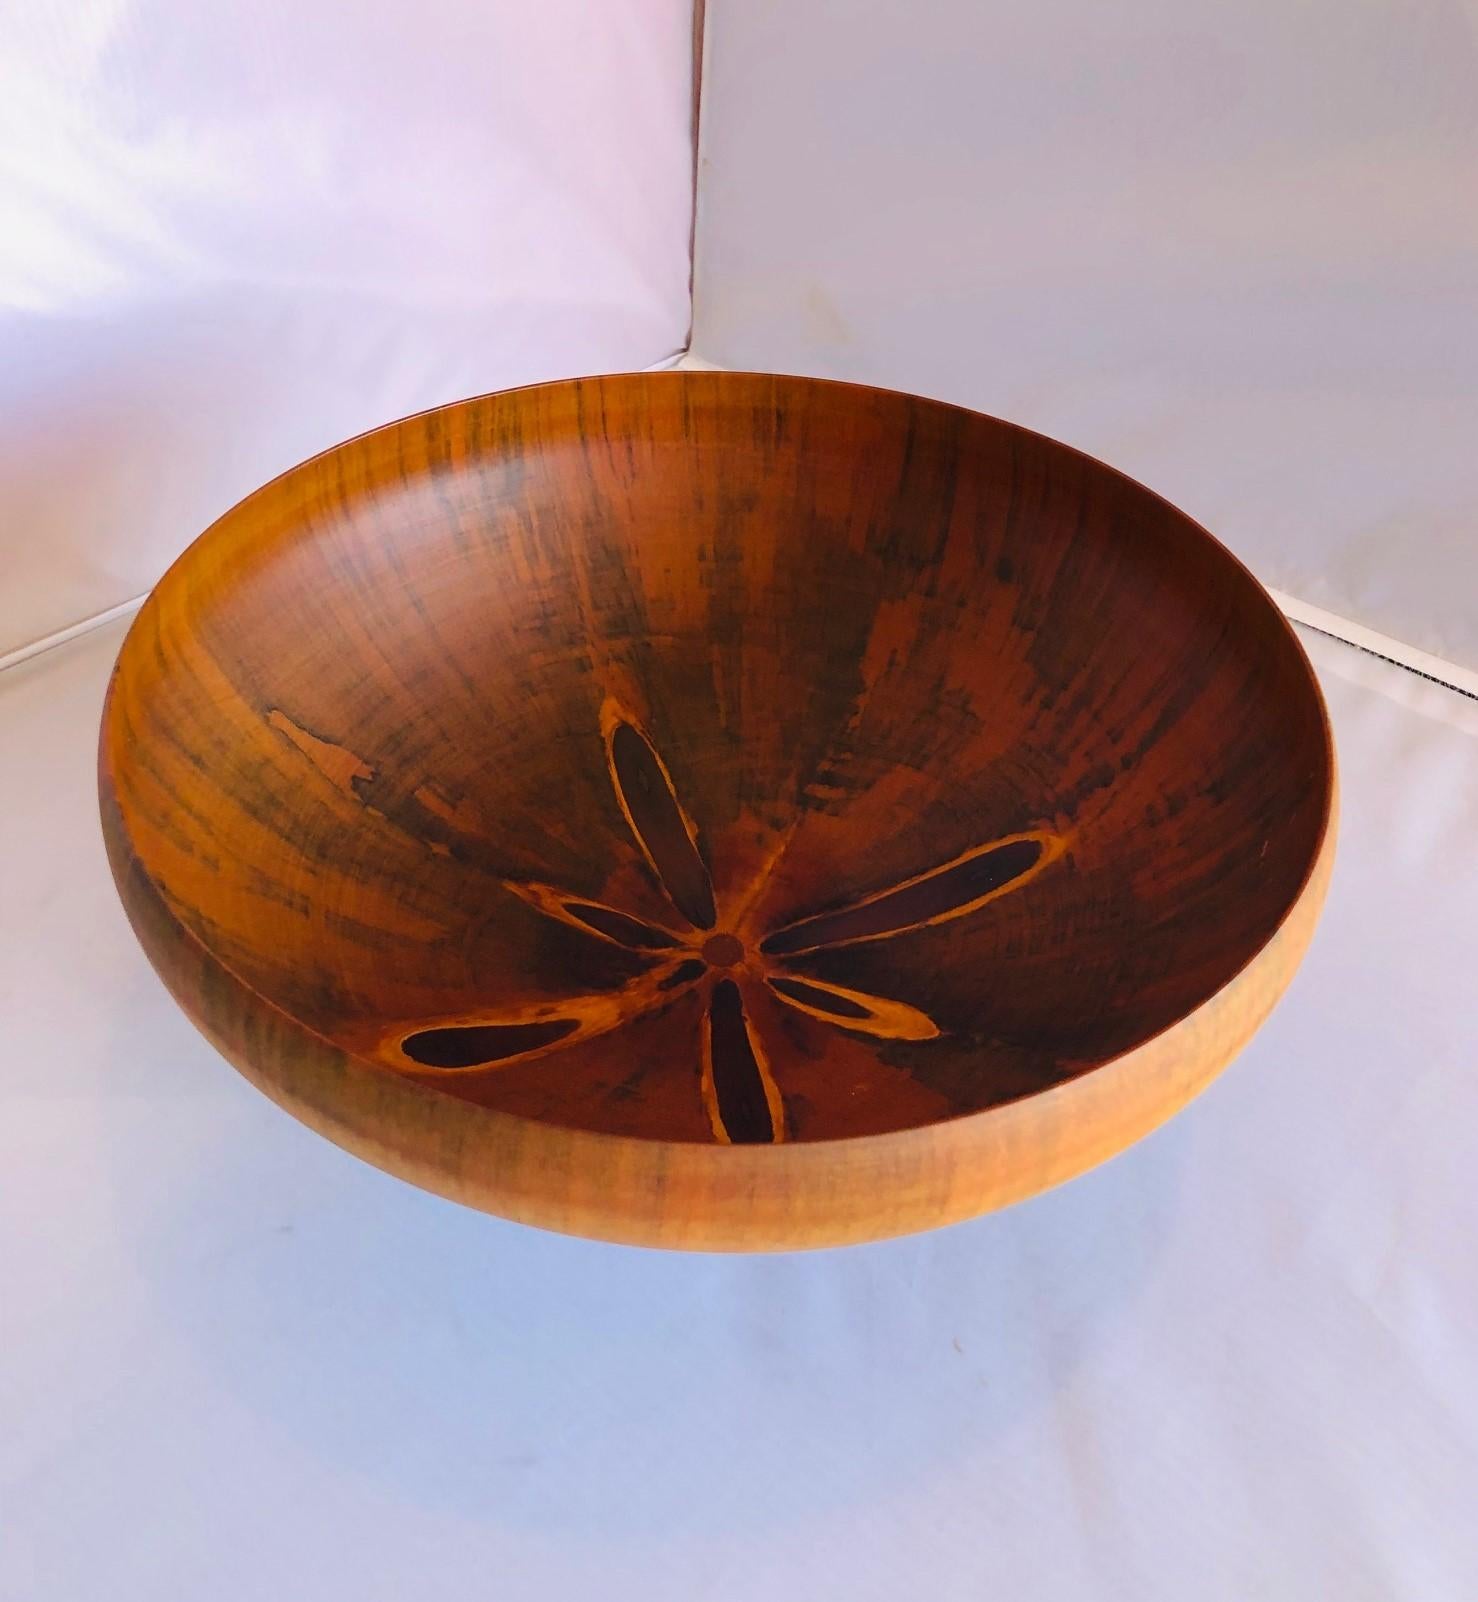 Unique and beautiful Norfolk Island pine bowl by Gene Bickerstaff, circa 1998. The bowl has a translucent effect to it which is created by soaking the wood in orange oil for weeks prior to turning it.